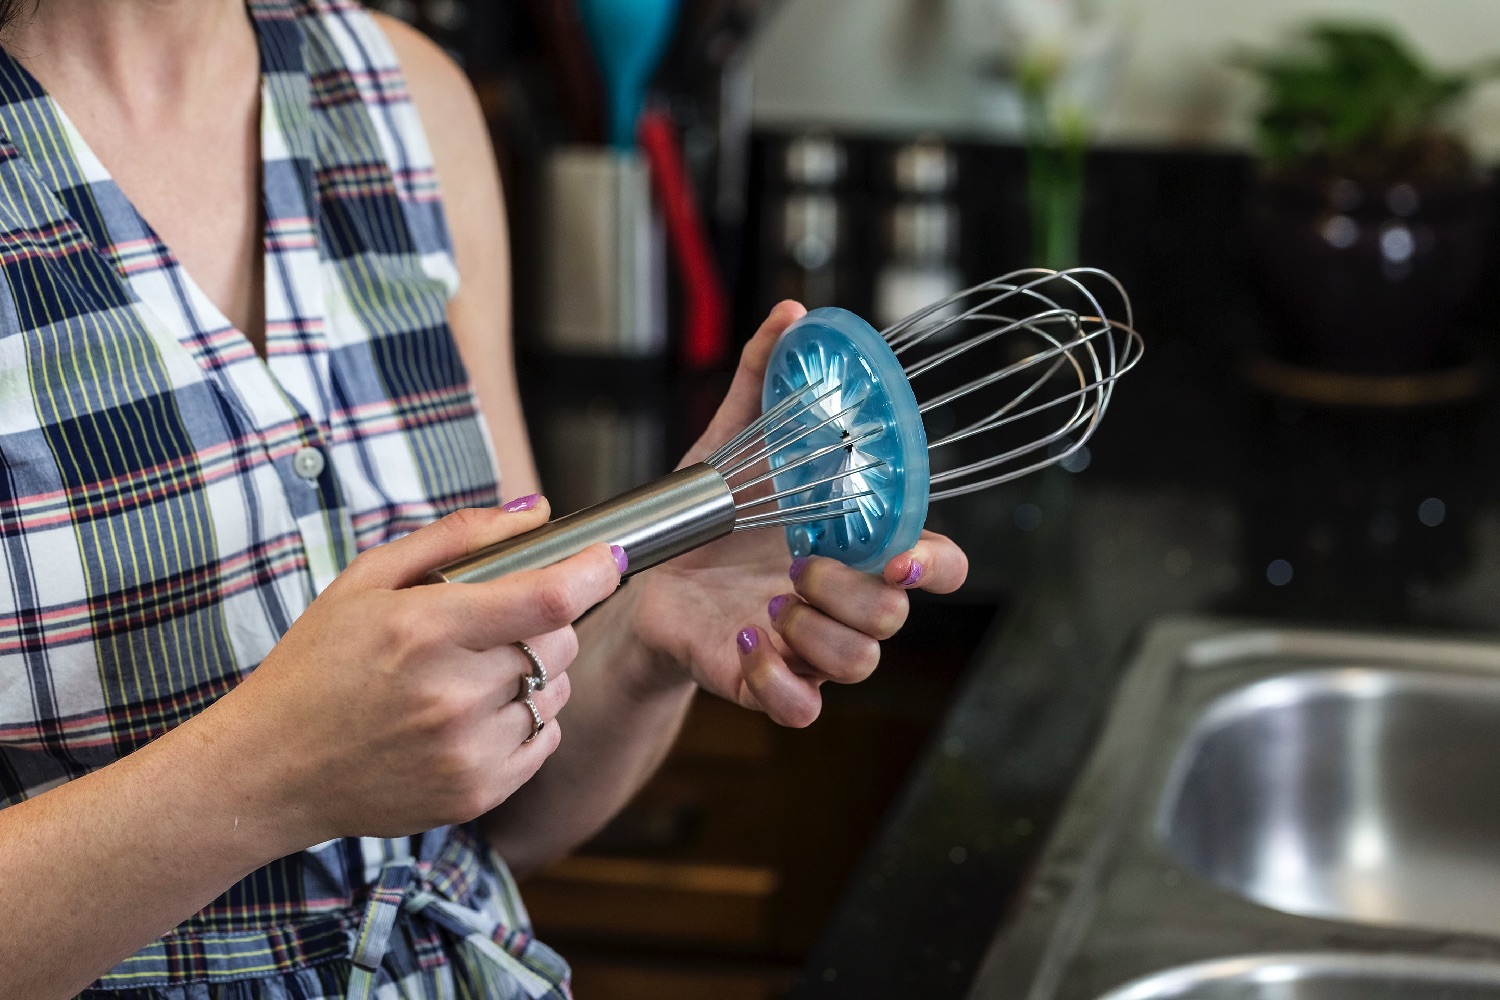 Whisk Wiper Lets You Easily Clean Messy Whisks